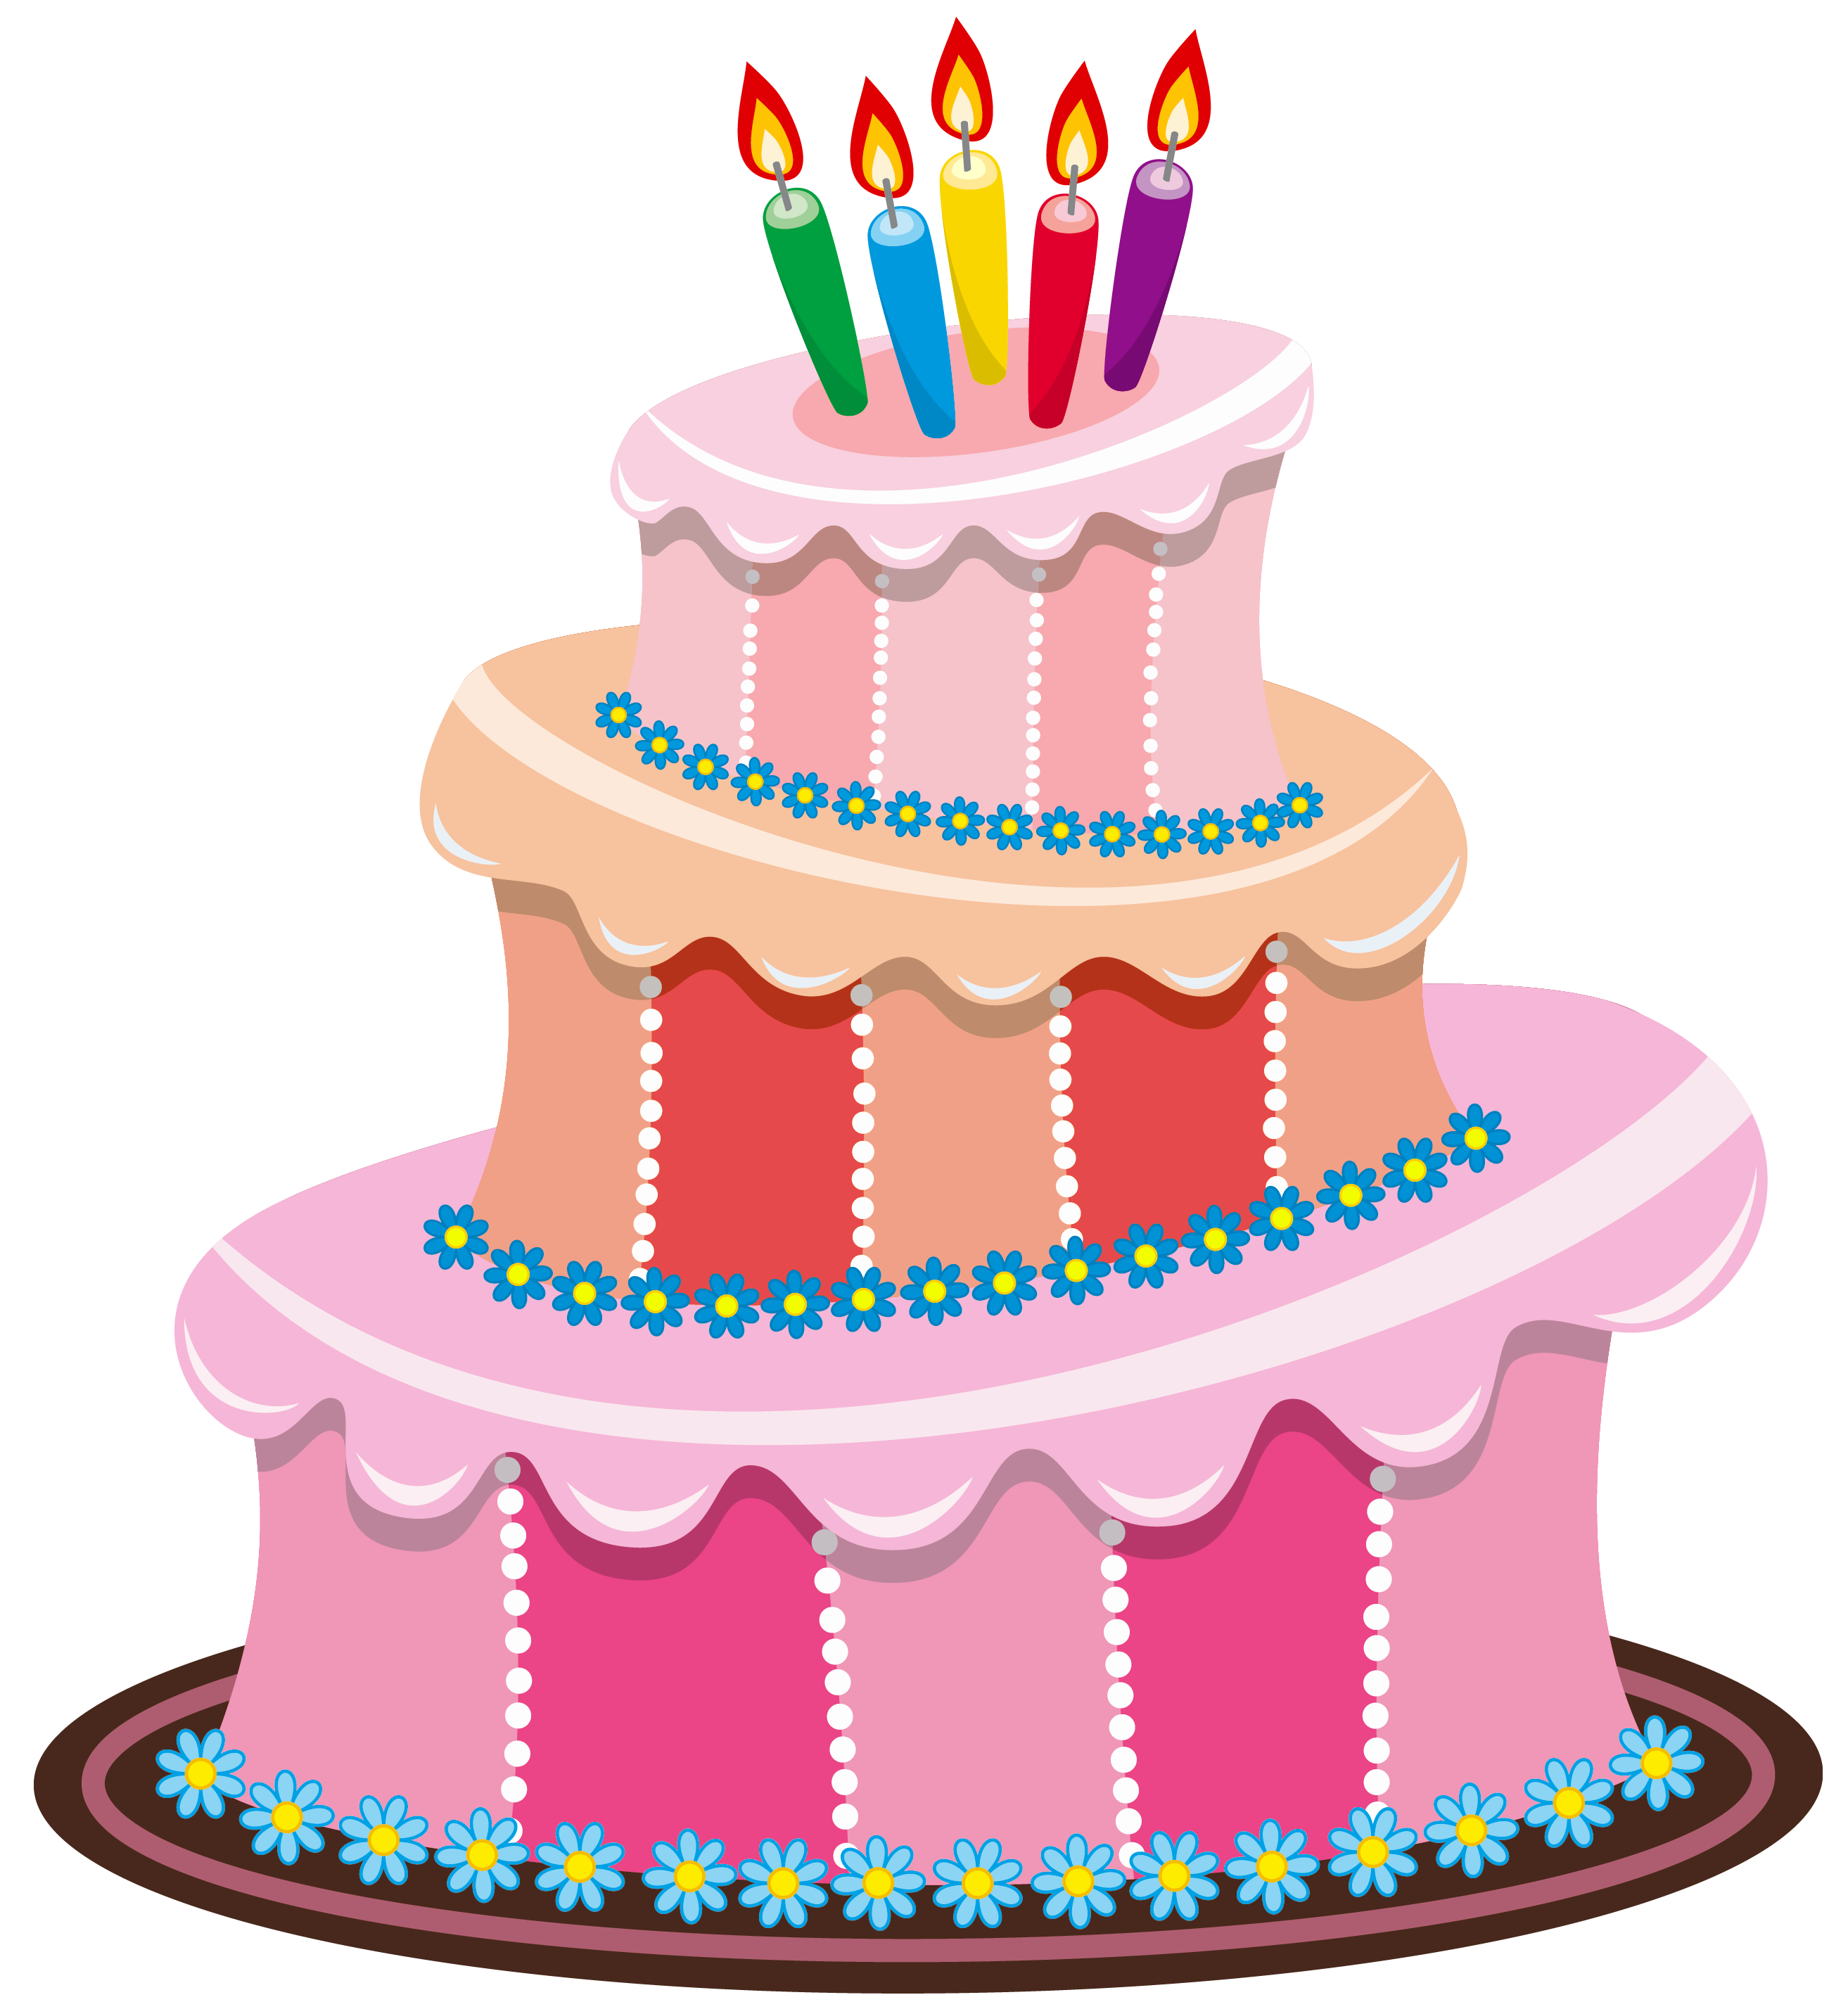 Birthday cake png pasha EDITZ | Background wallpaper for photoshop,  Background for photography, Nature baground images